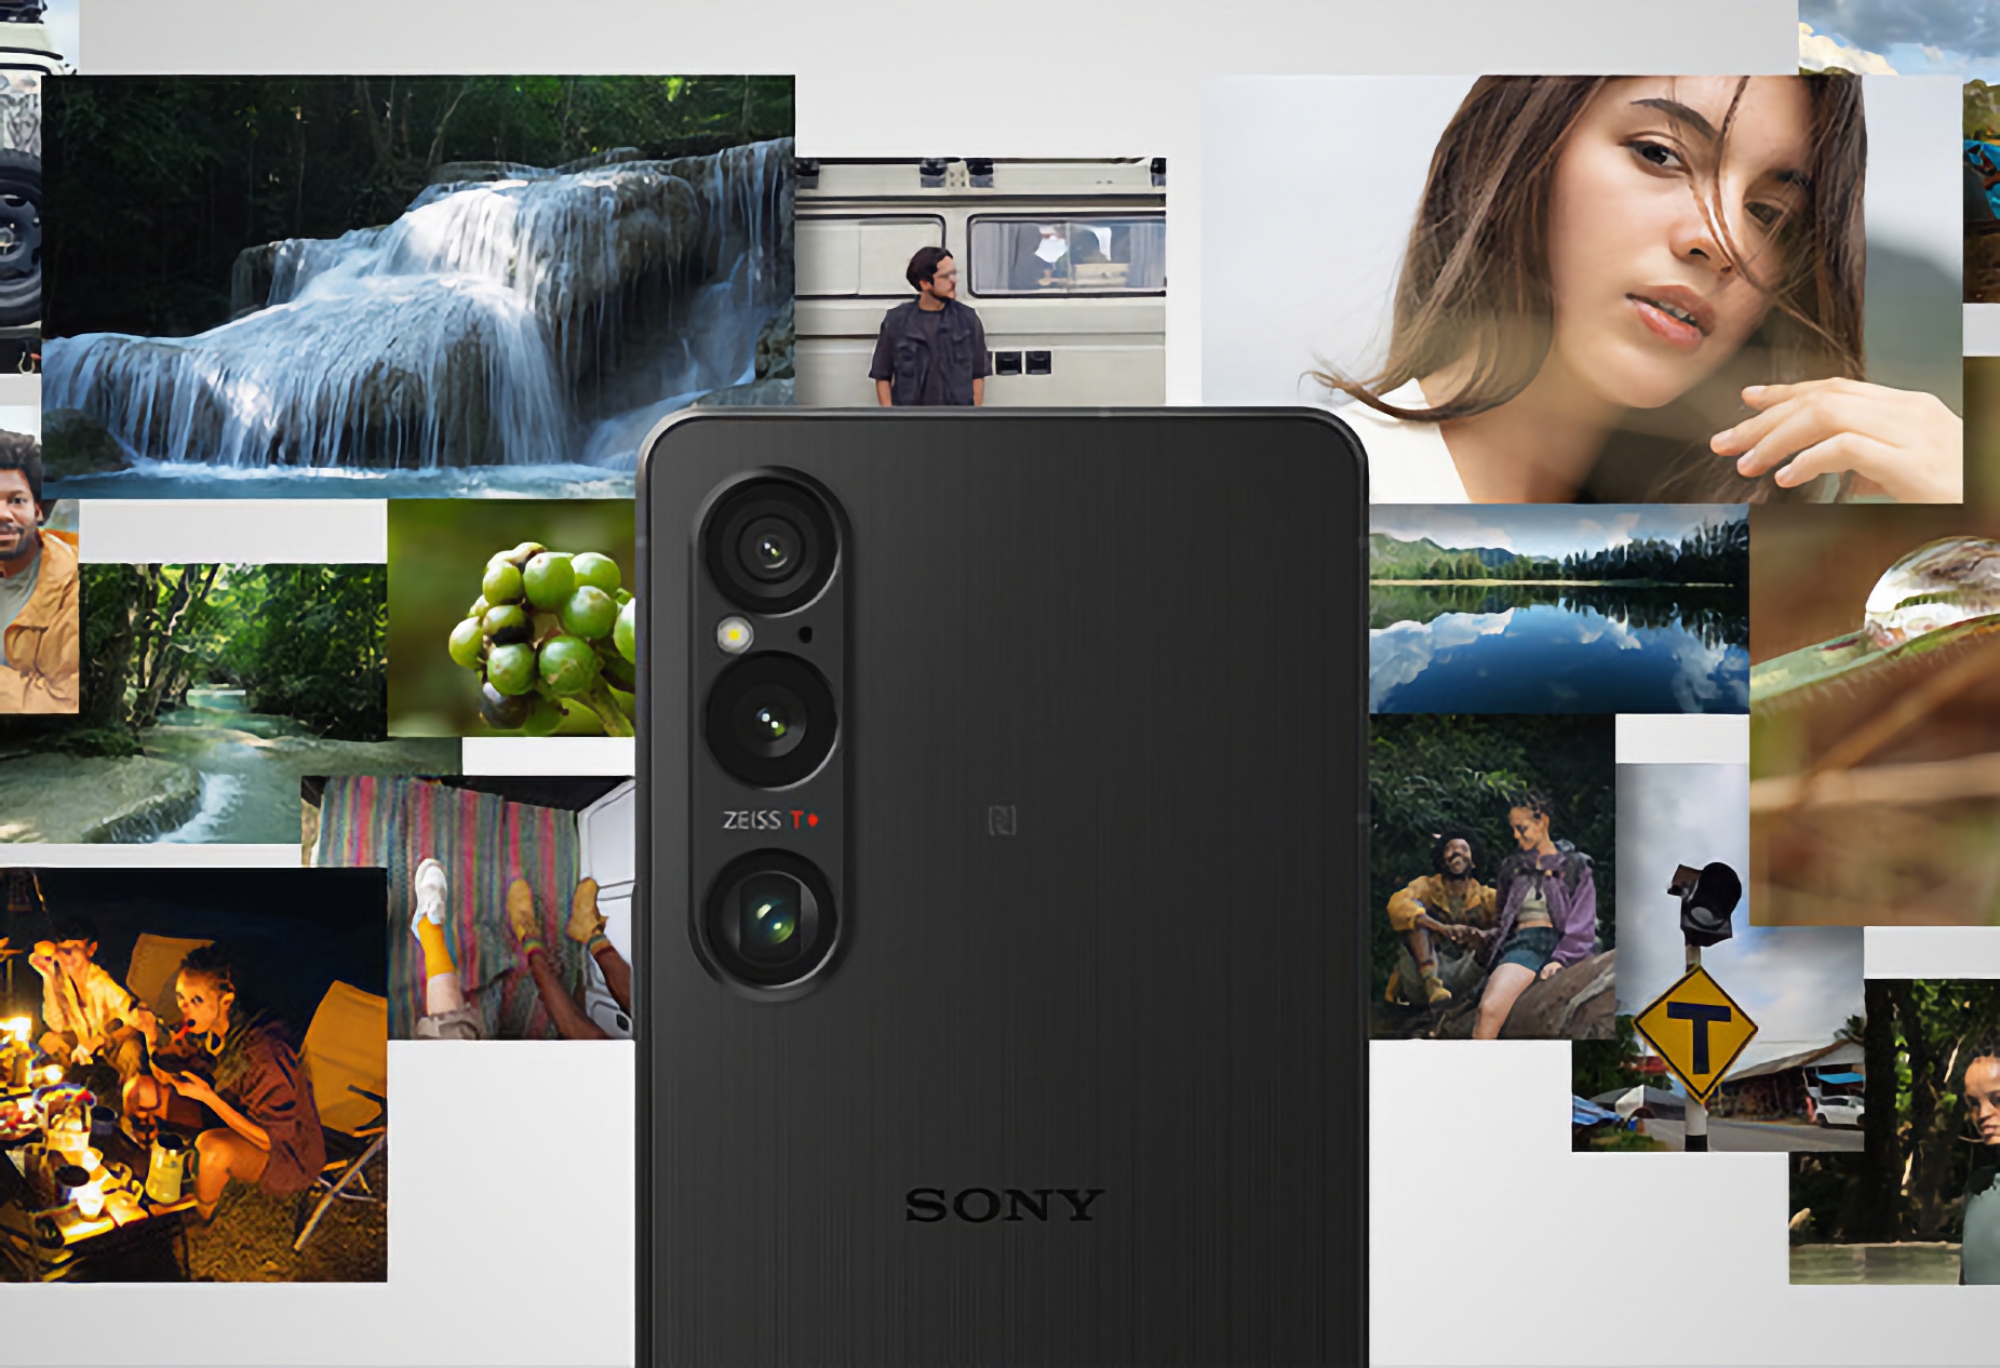 ZEISS camera, 5000 mAh battery, wireless charging and Bravia screen: the Sony Xperia 1 VI flagship appeared on press renders